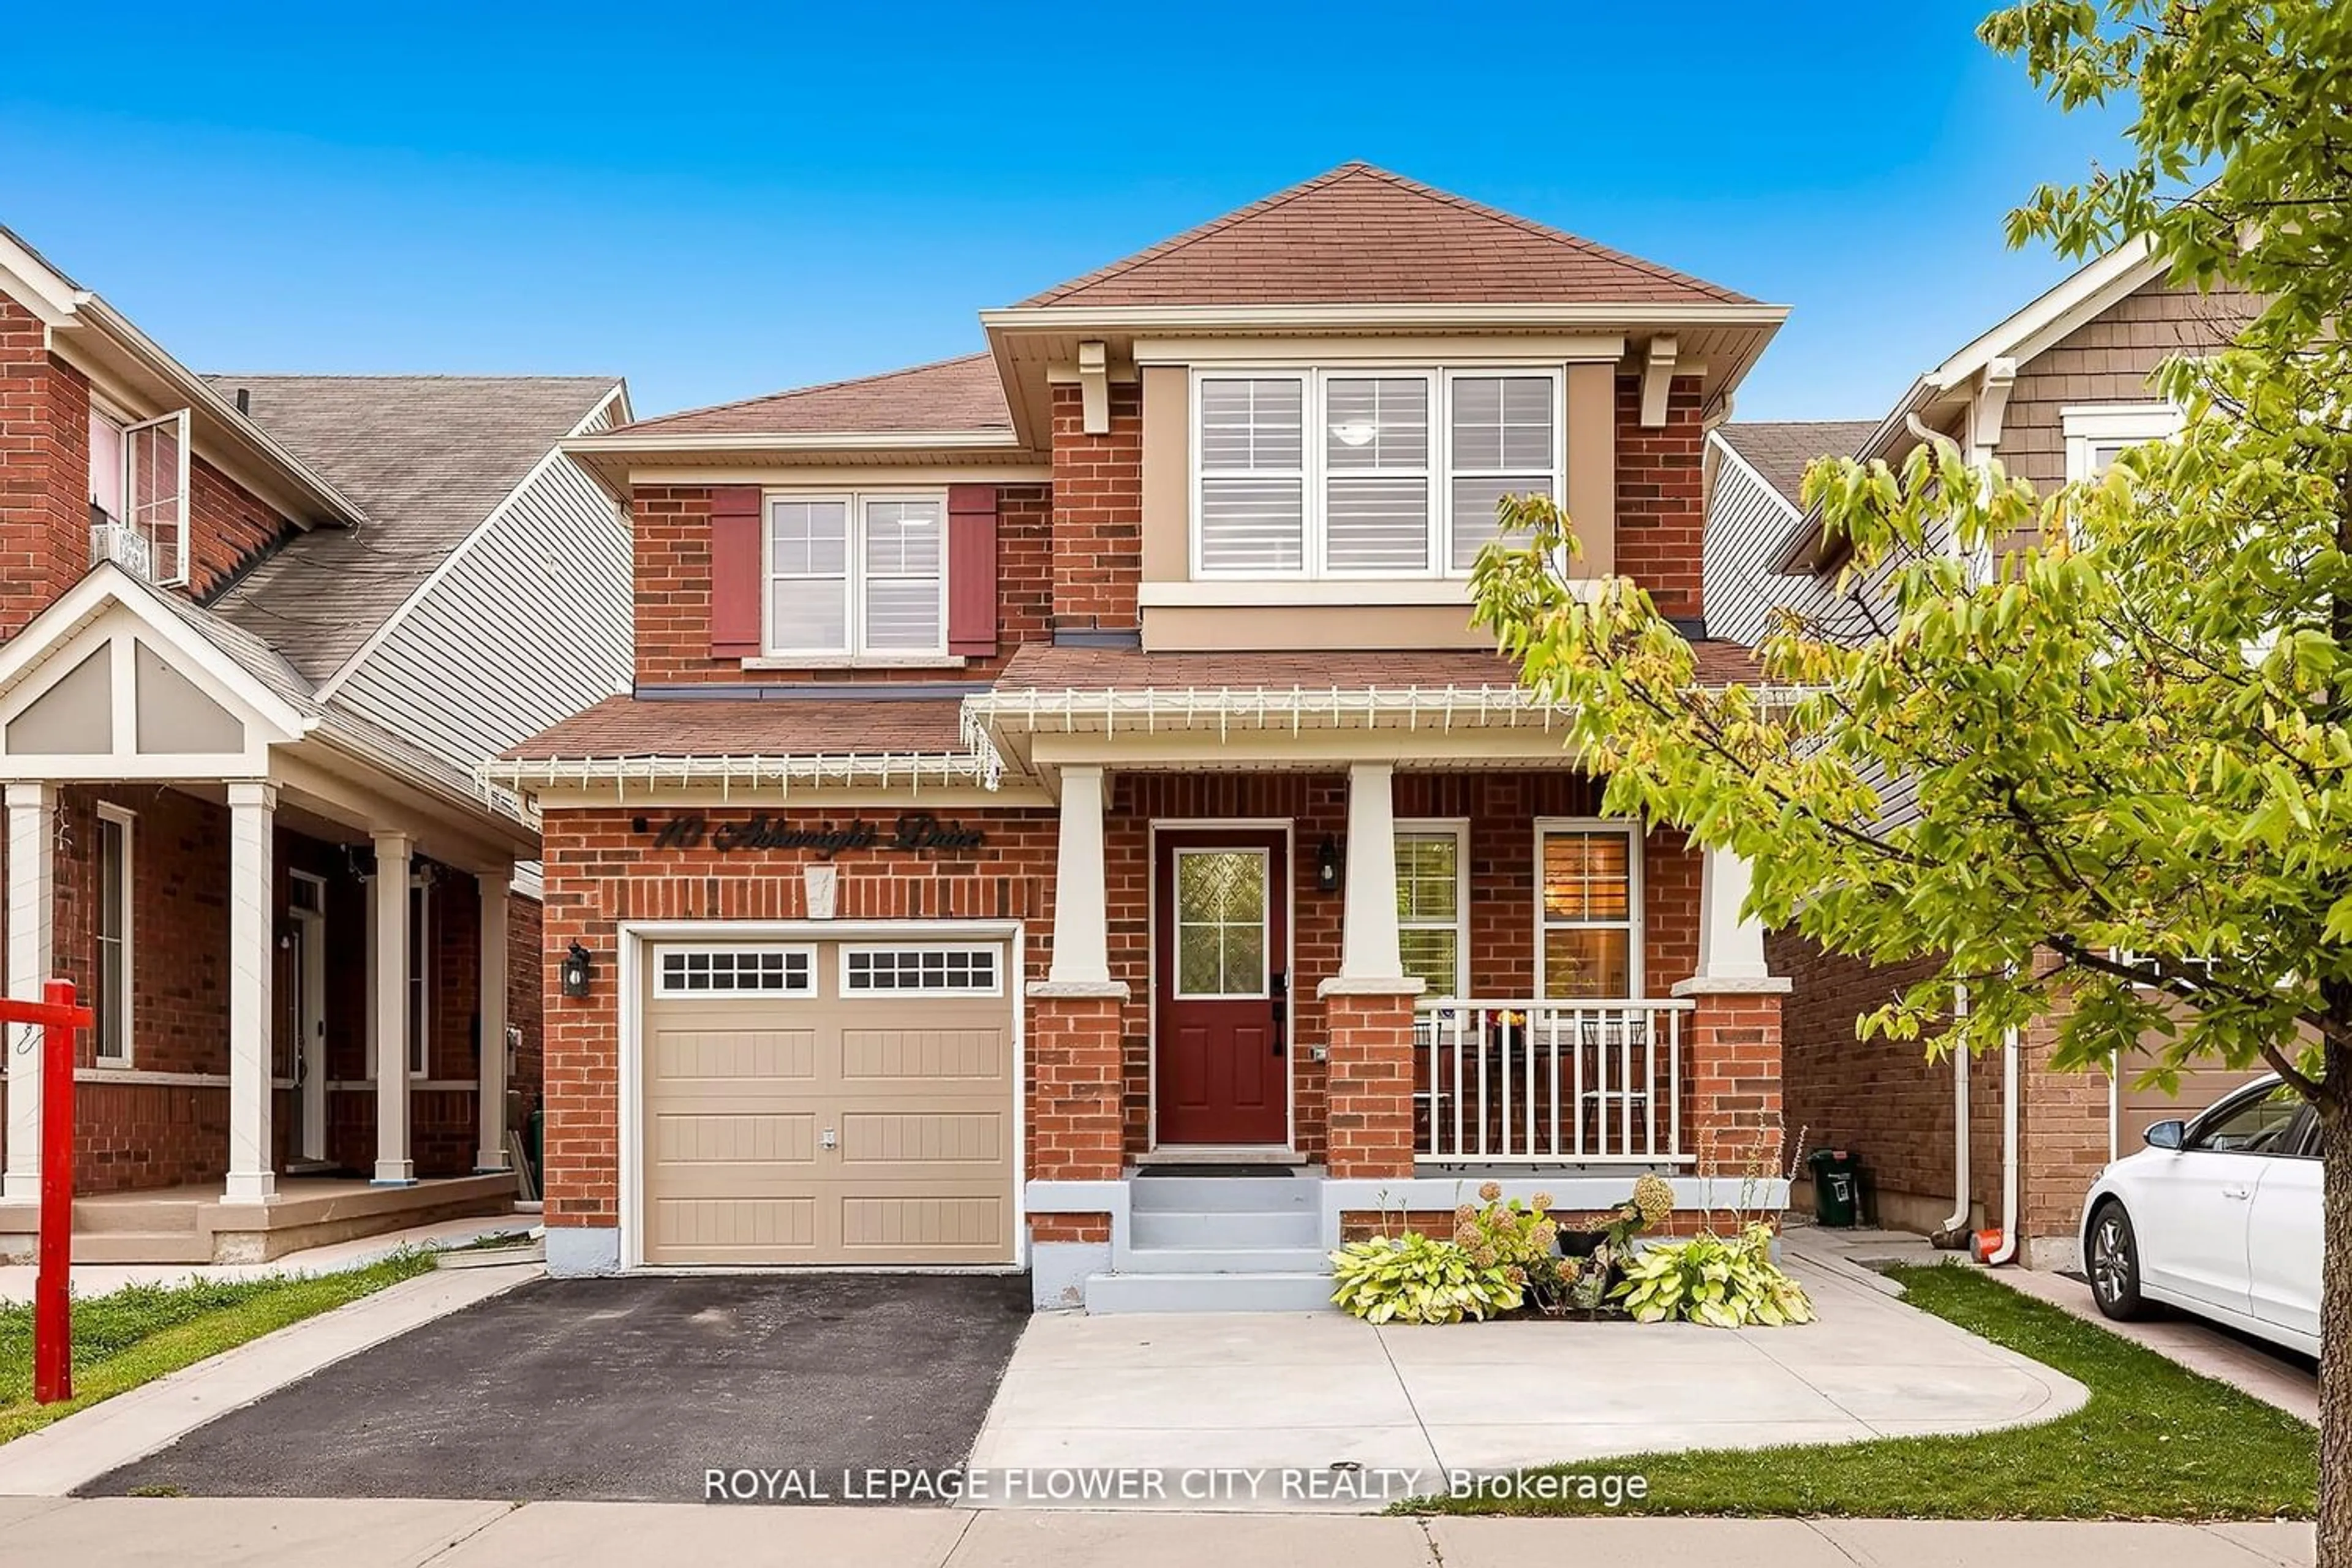 Home with brick exterior material for 10 Arkwright Dr, Brampton Ontario L7A 0V1